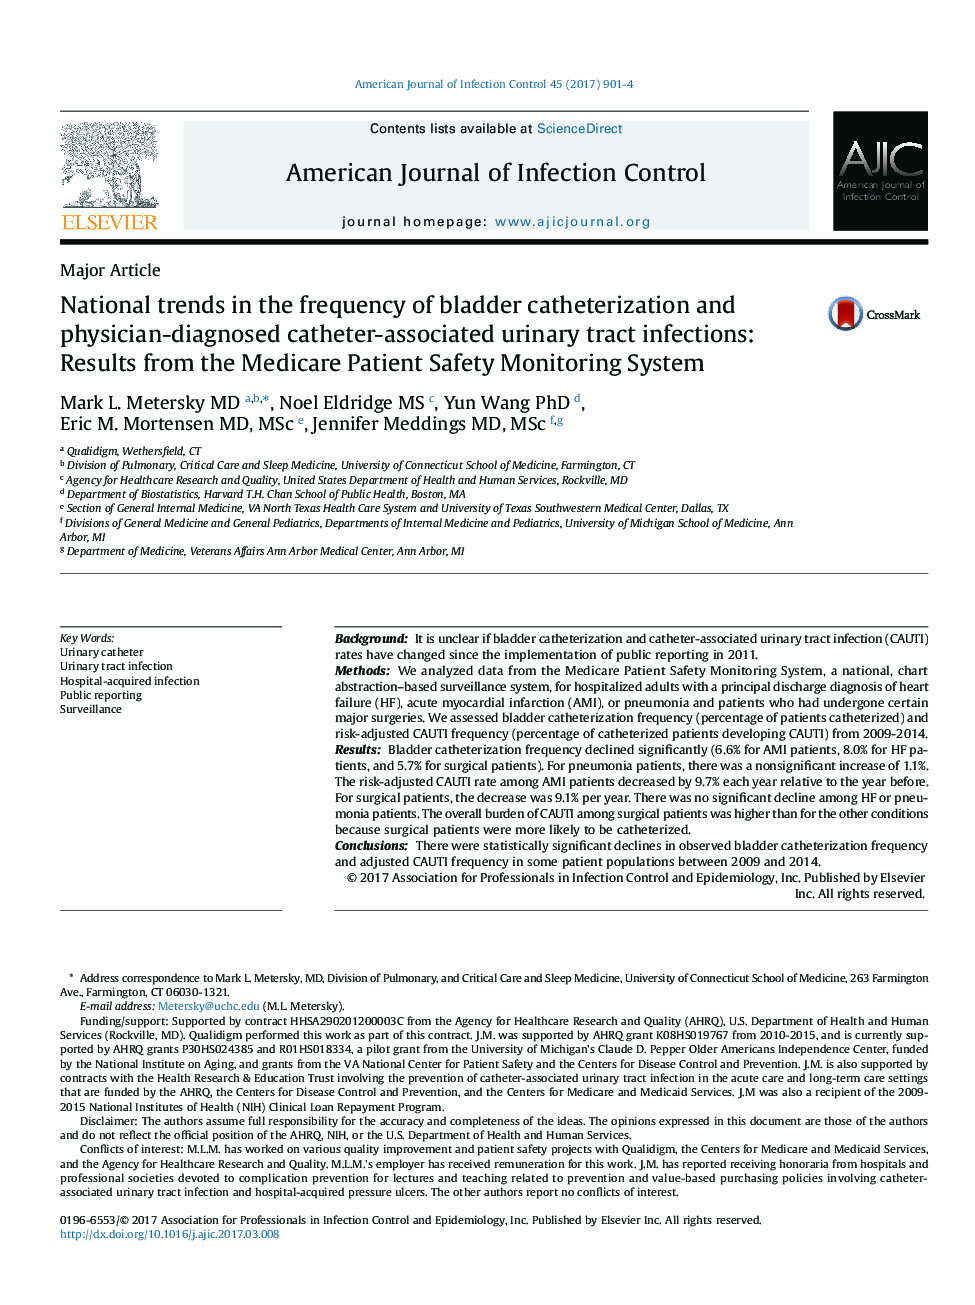 National trends in the frequency of bladder catheterization and physician-diagnosed catheter-associated urinary tract infections: Results from the Medicare Patient Safety Monitoring System